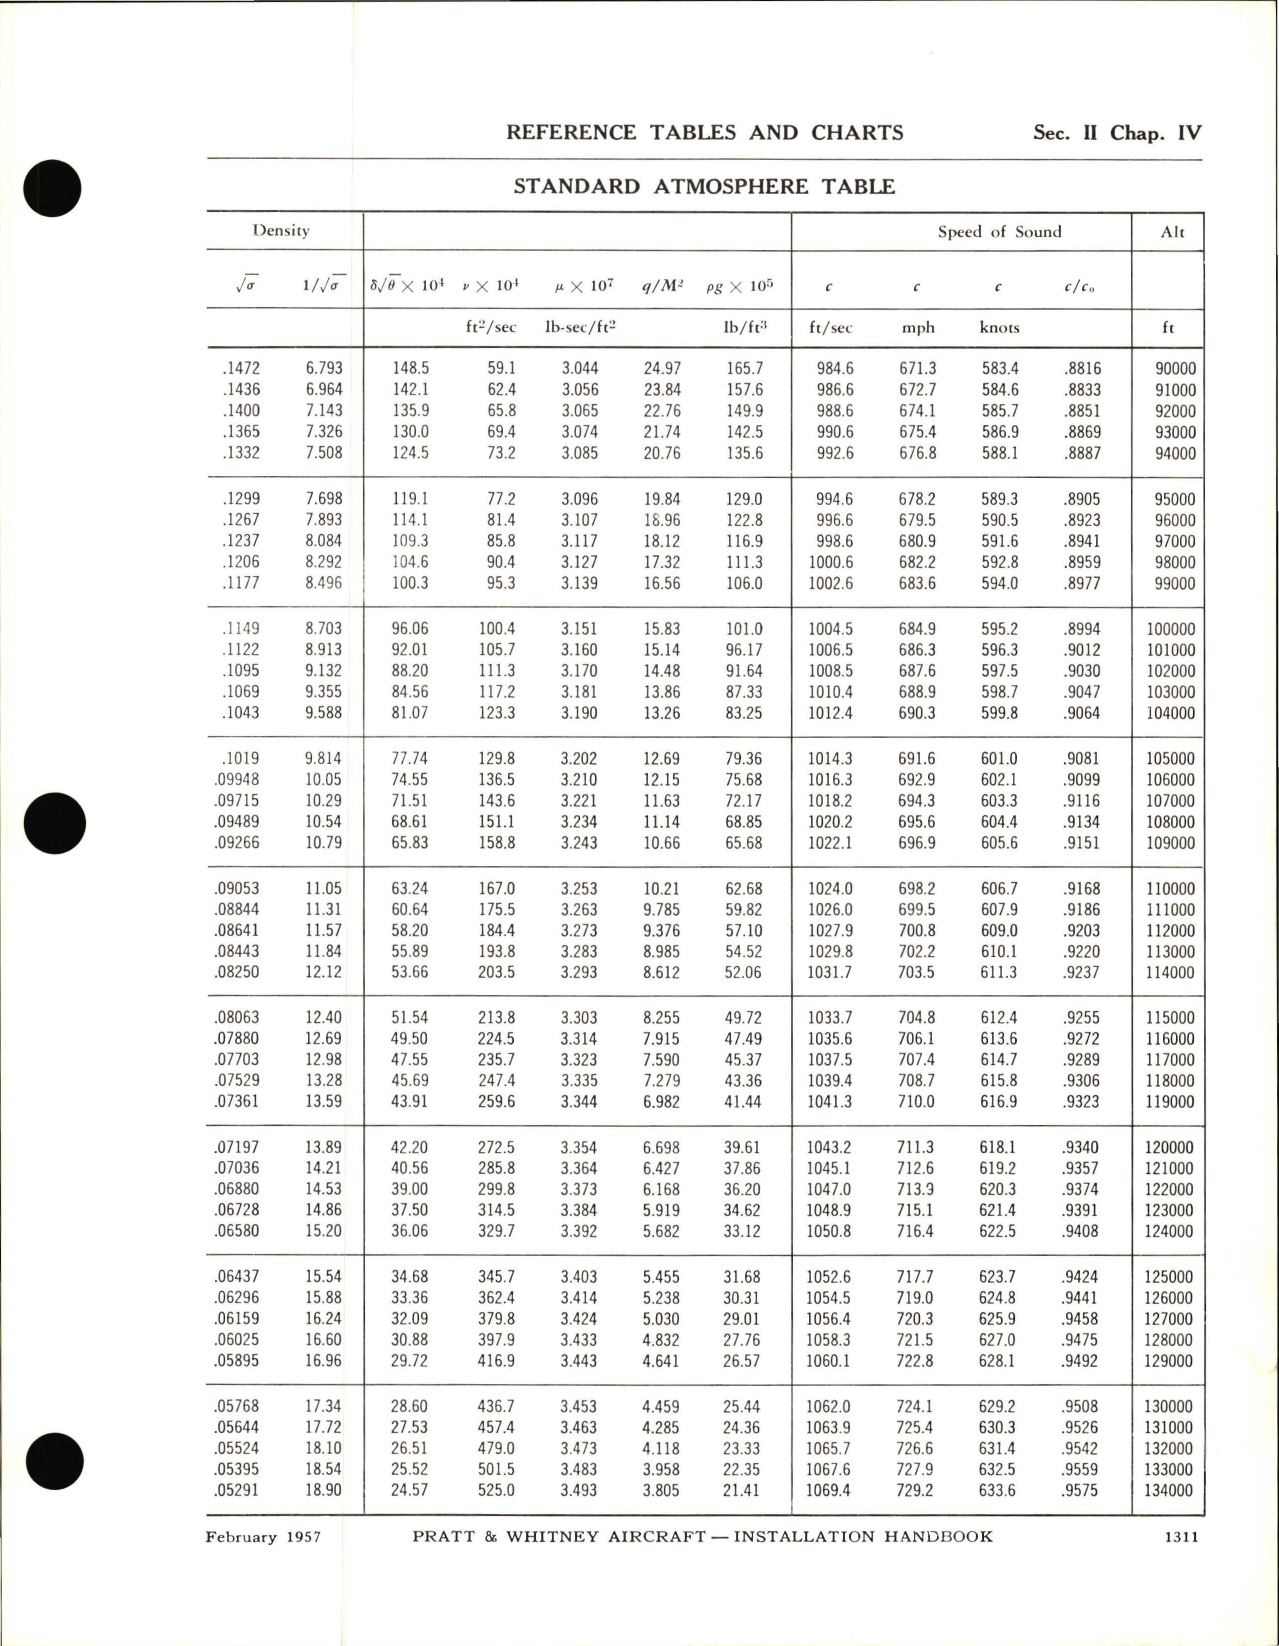 Sample page 9 from AirCorps Library document: Installation Handbook for Reference Tables and Charts 